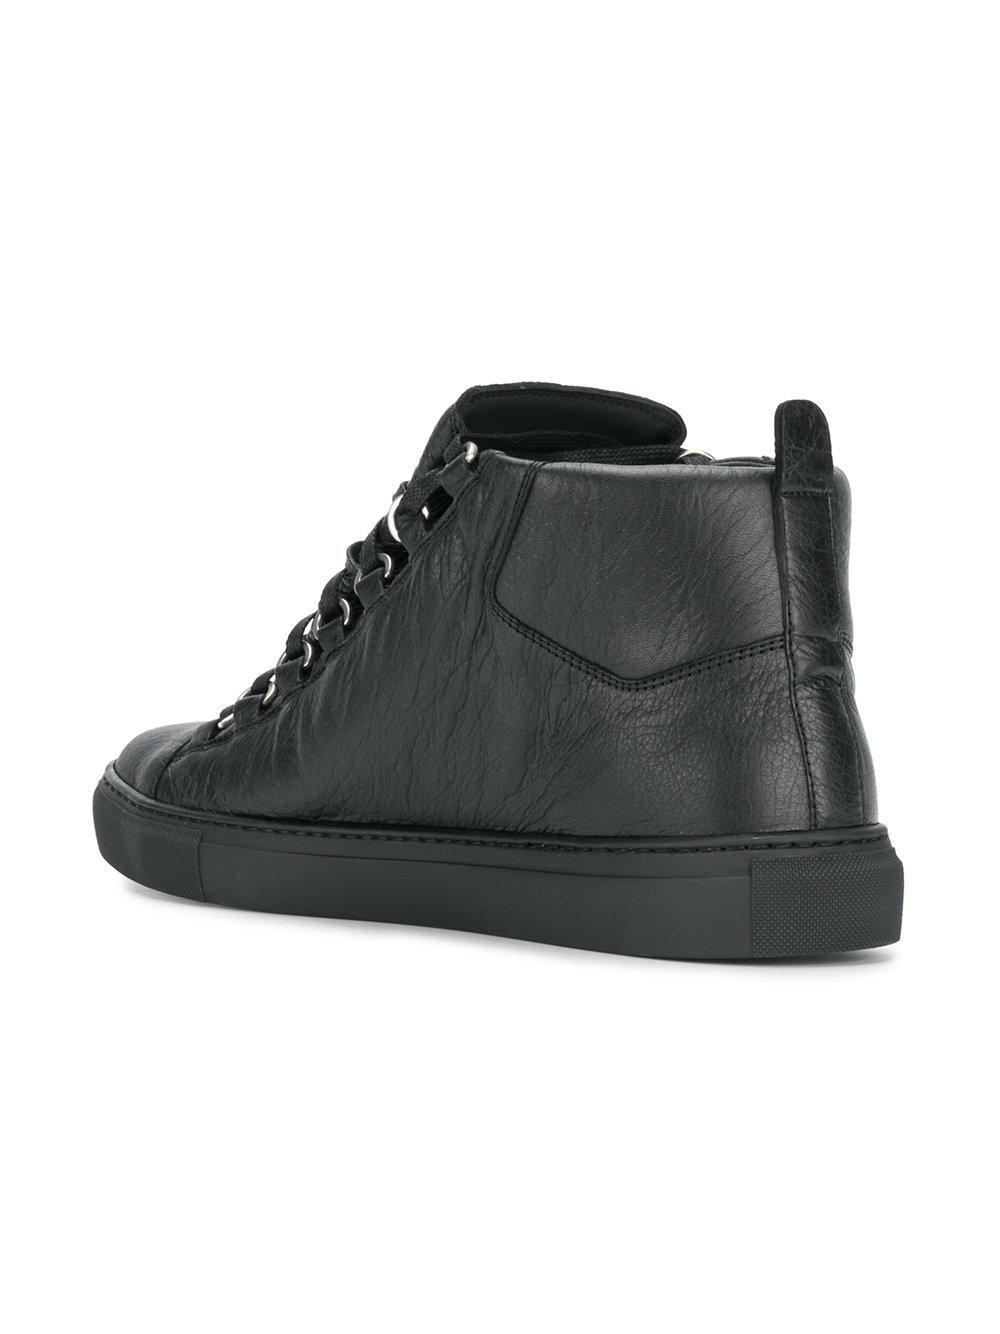 Balenciaga Arena High-top Leather Trainers in Black for Men | Lyst